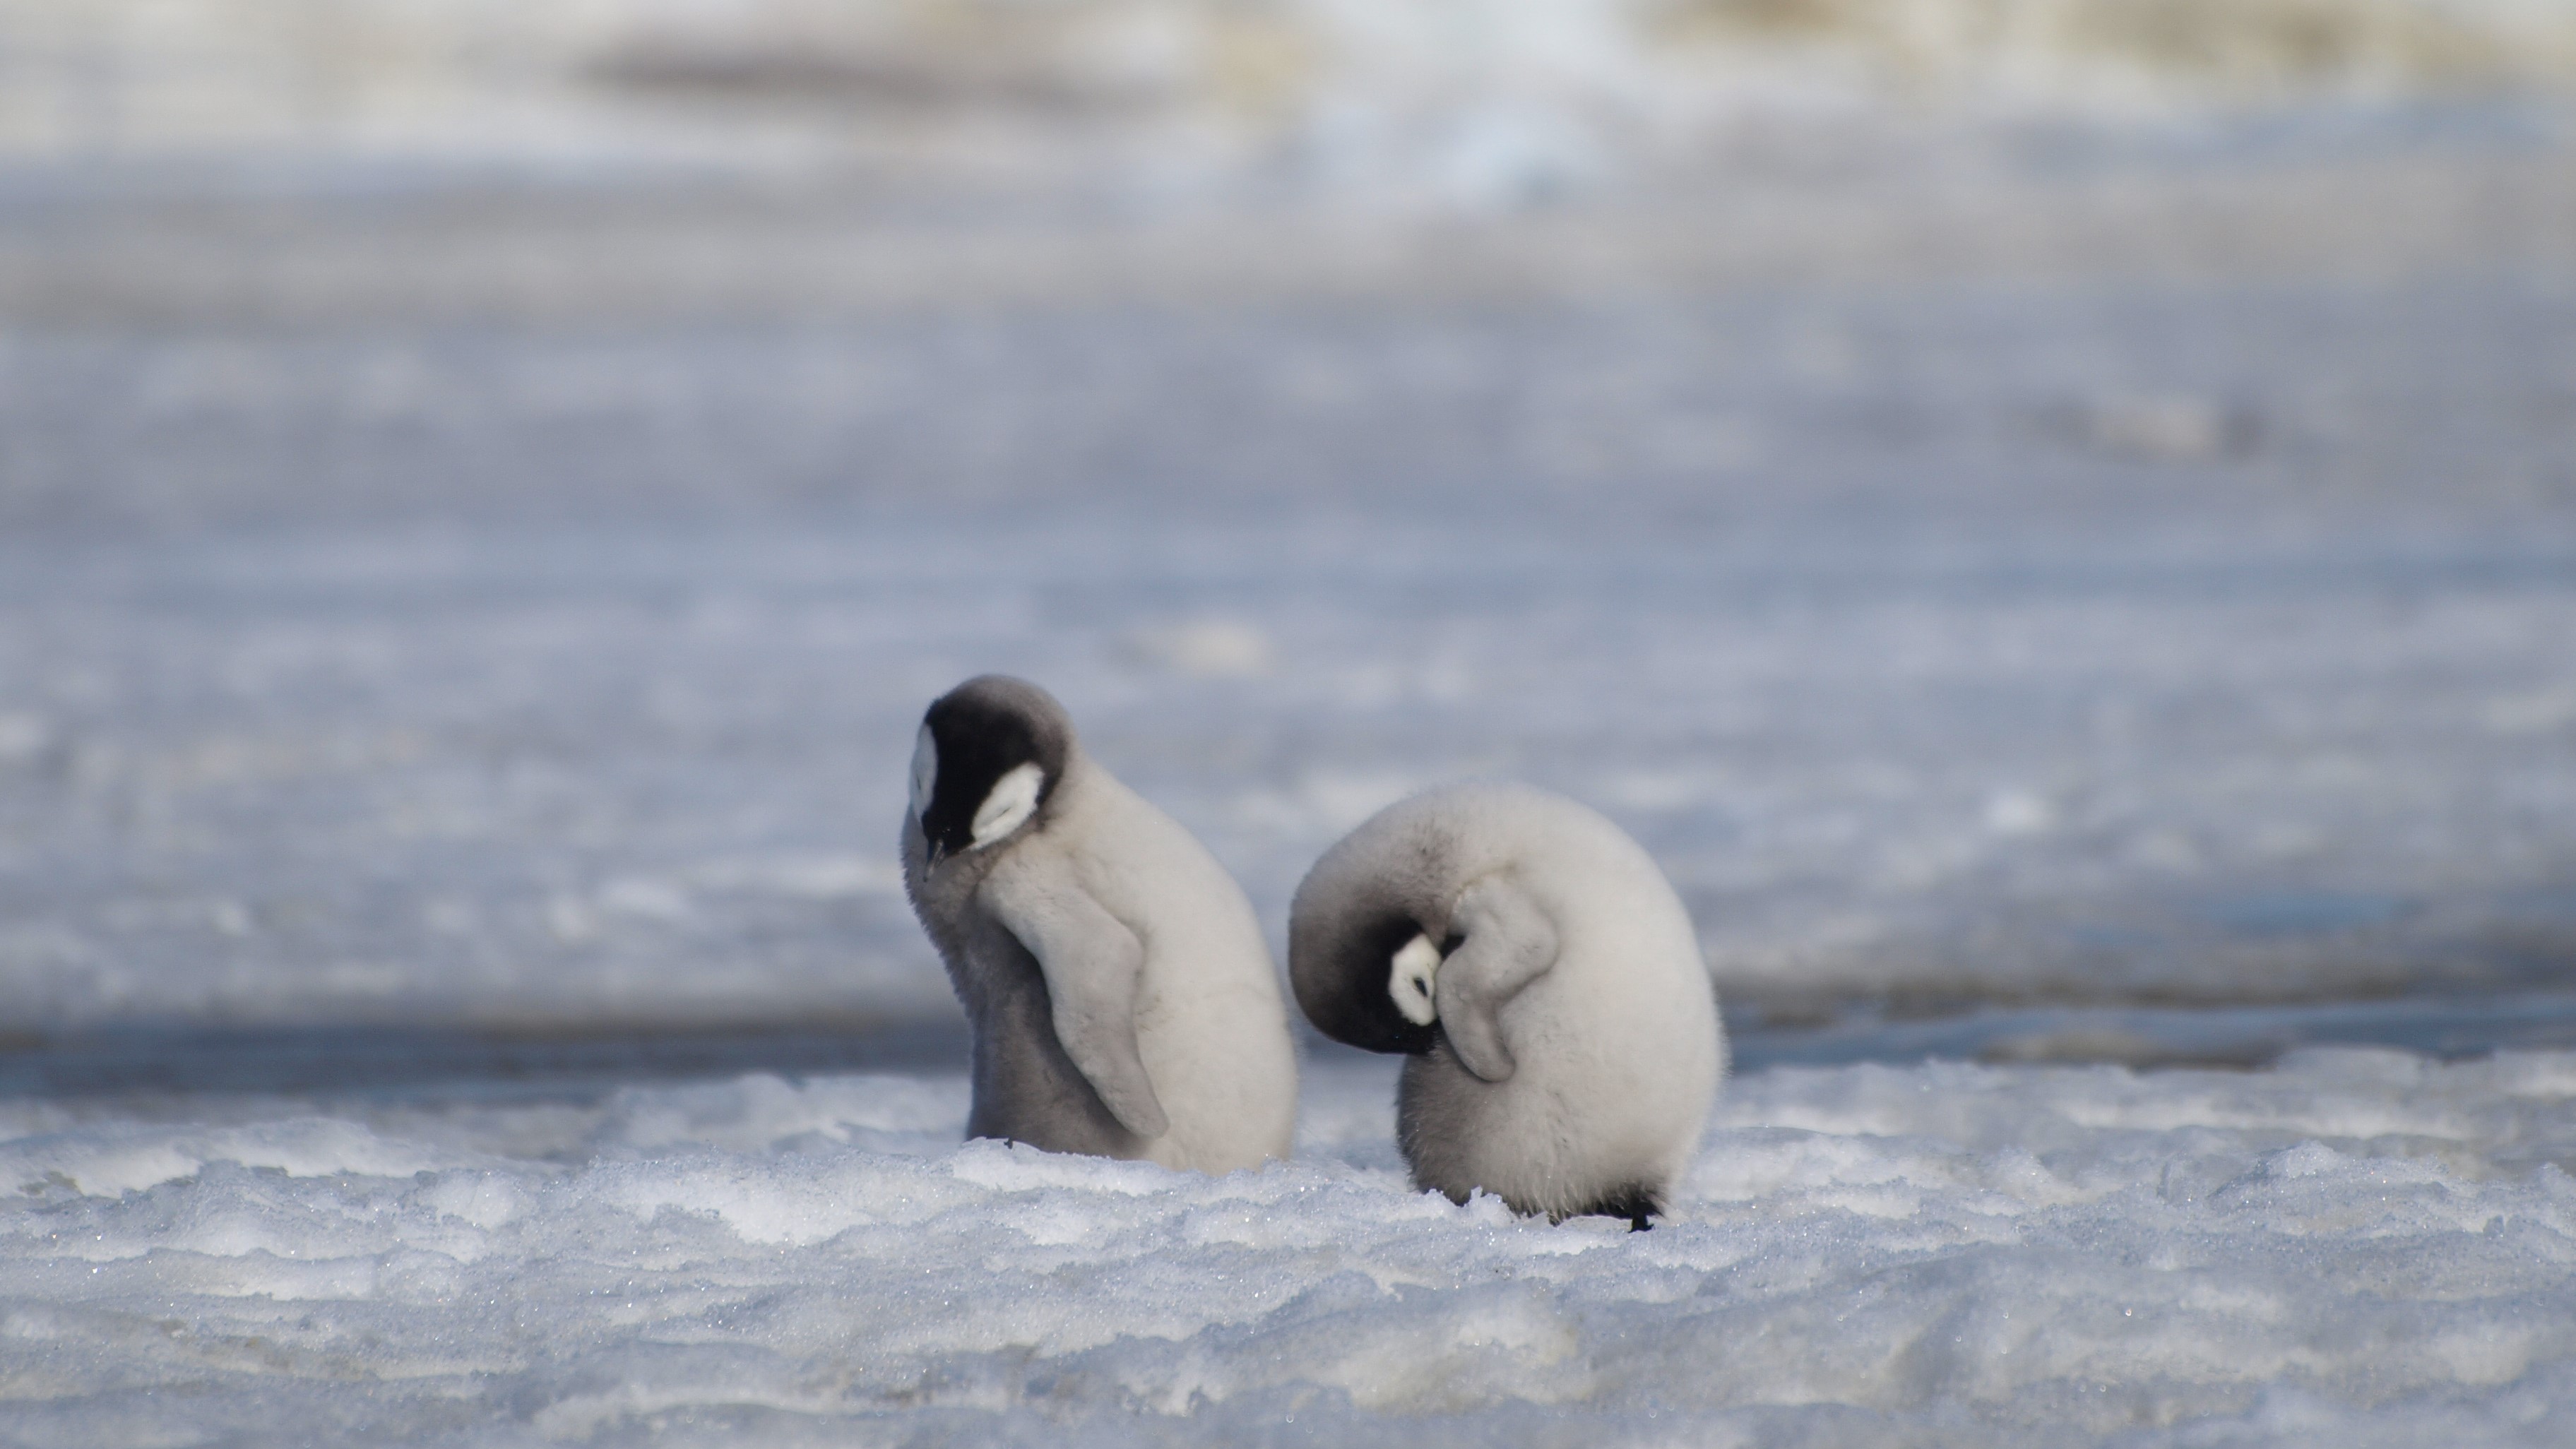 Two emperor penguin chicks groom themselves in melting ice.